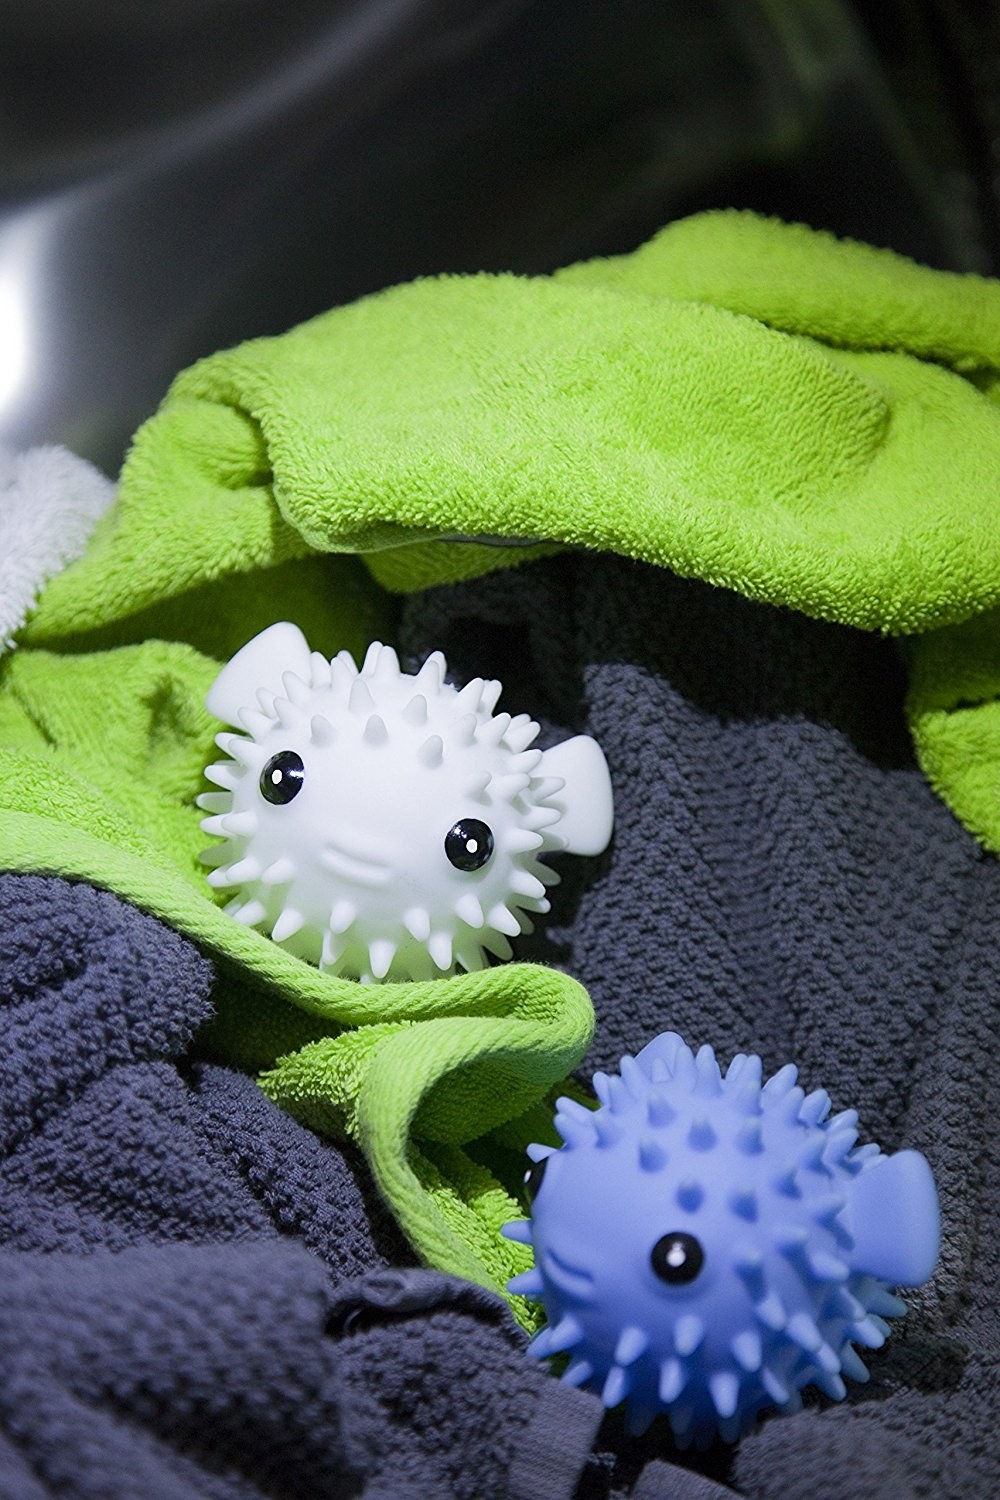 one white and one blue puffer fish-shaped dryer ball sitting in laundry